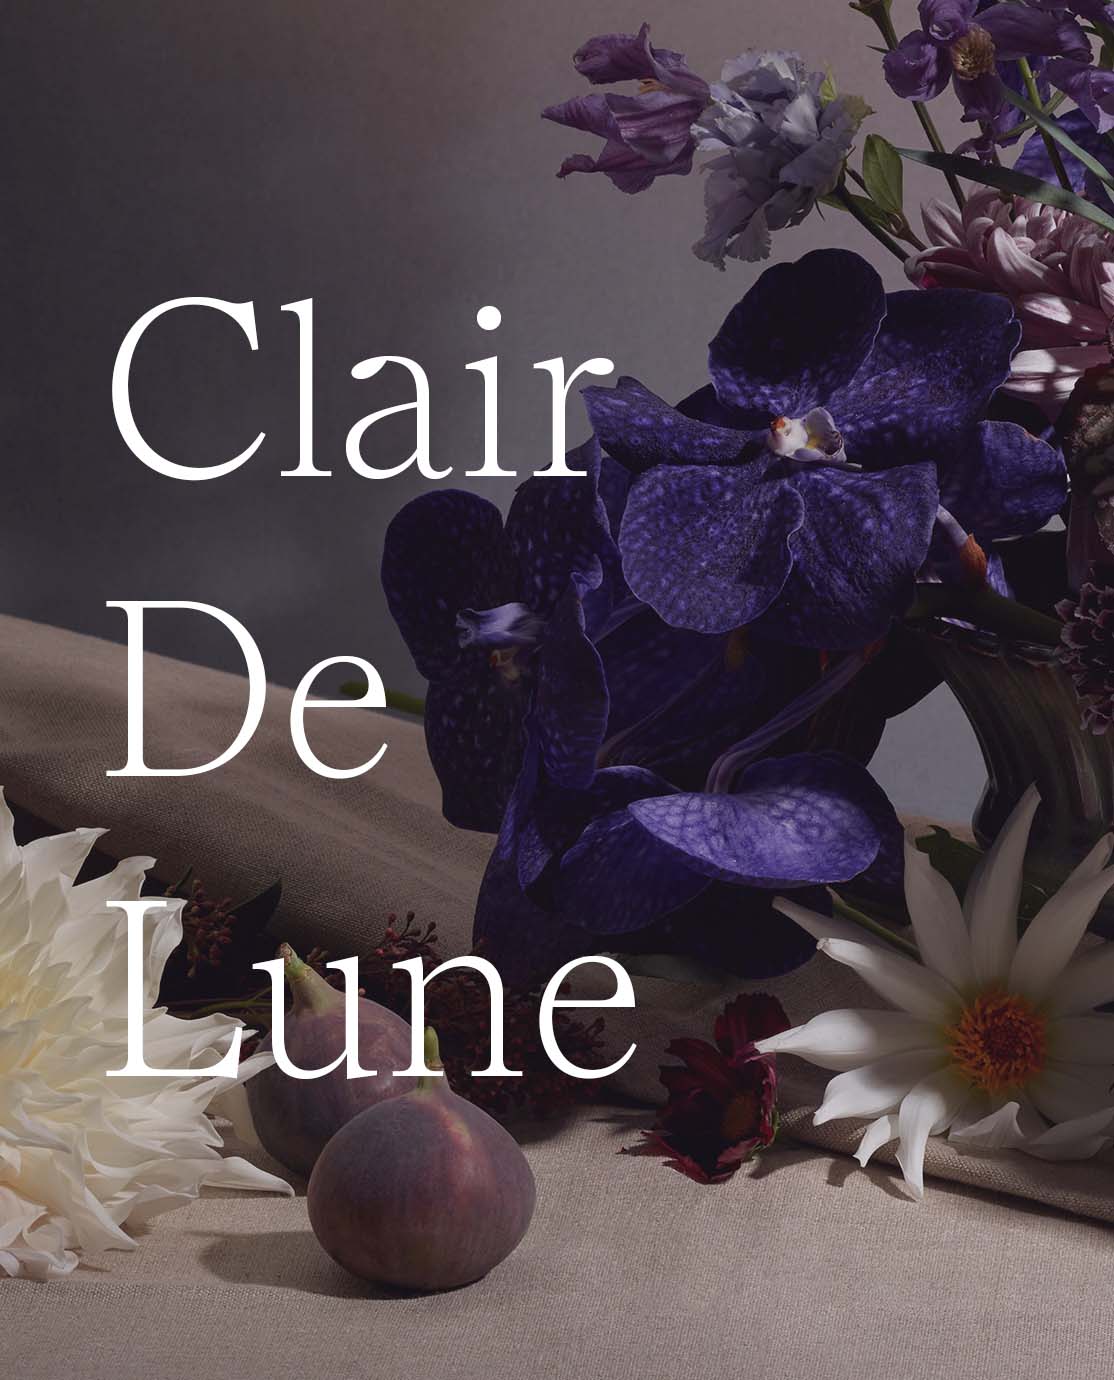 Clair De Lune written in white across a close-up of purple flowers and figs